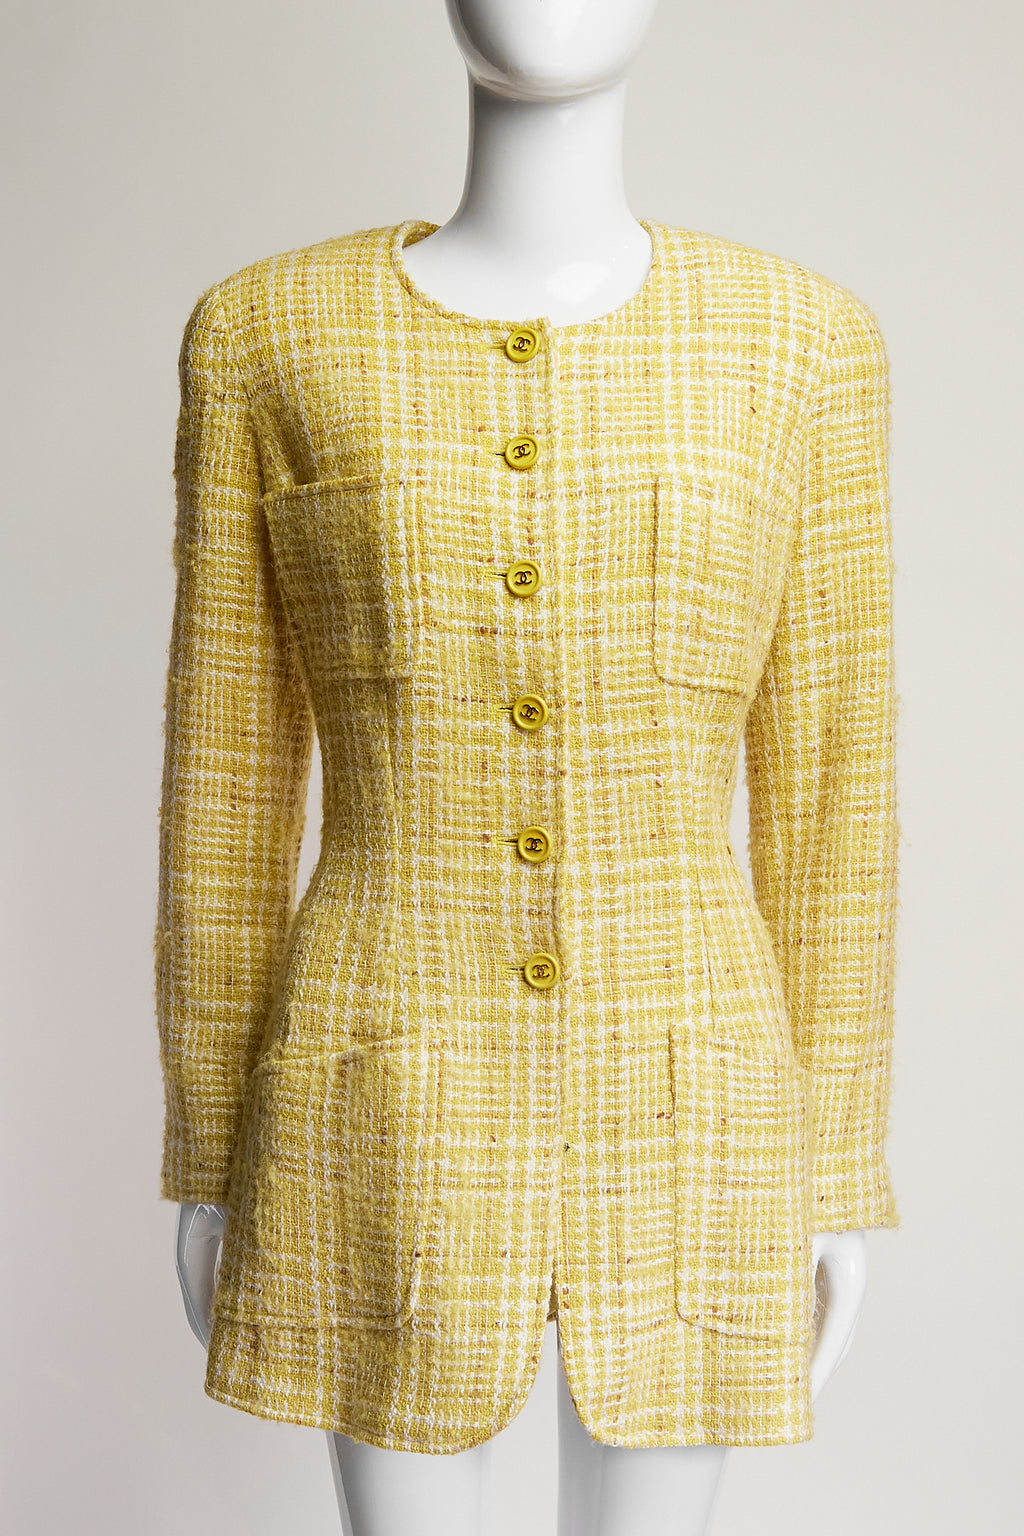 Chanel Boutique Vintage long Yellow Tweed Jacket